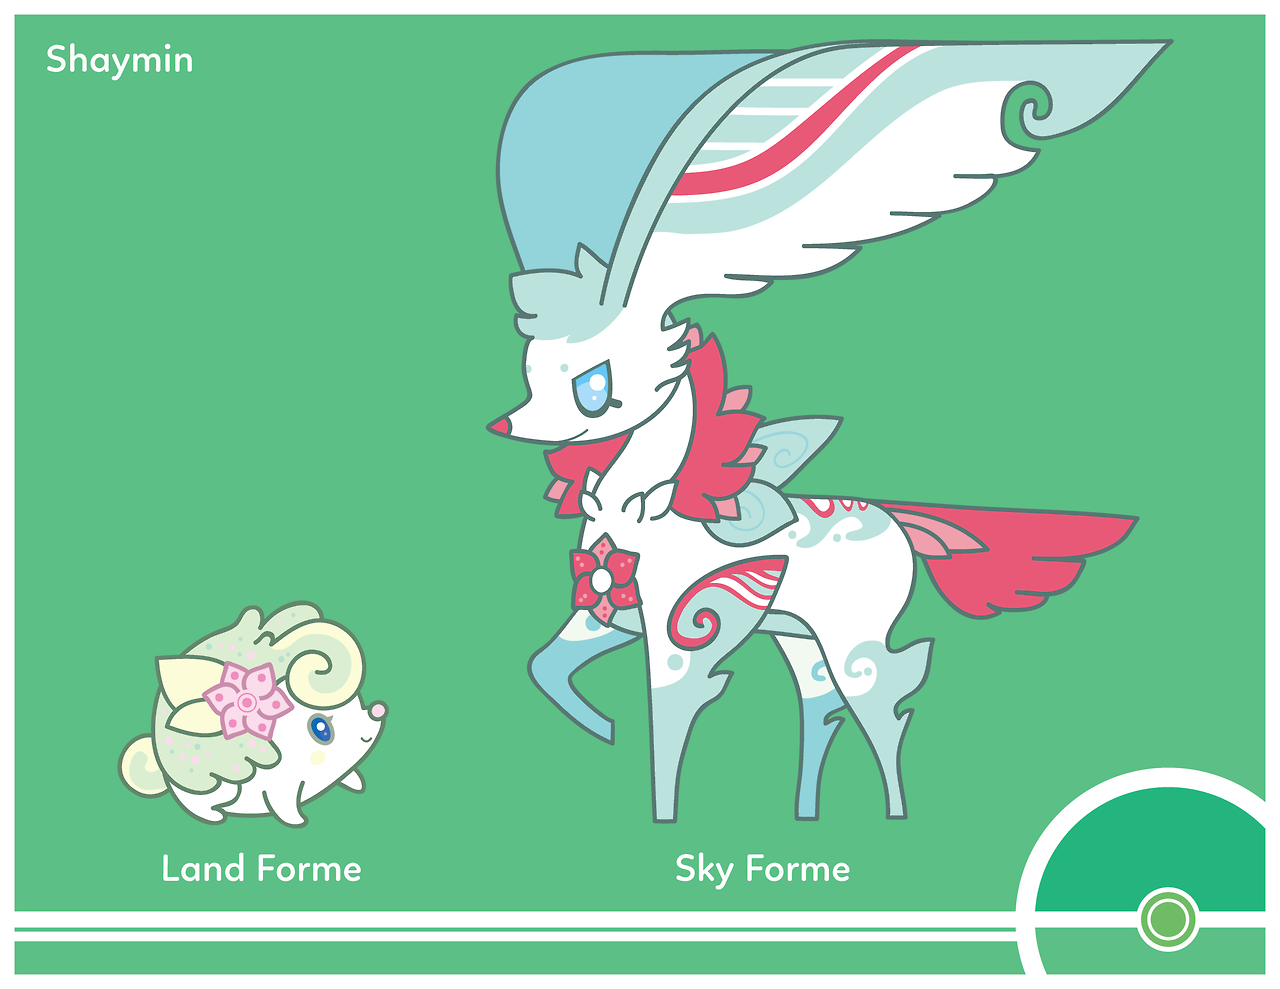 This has to be related to new shaymin forms : r/PokeLeaks